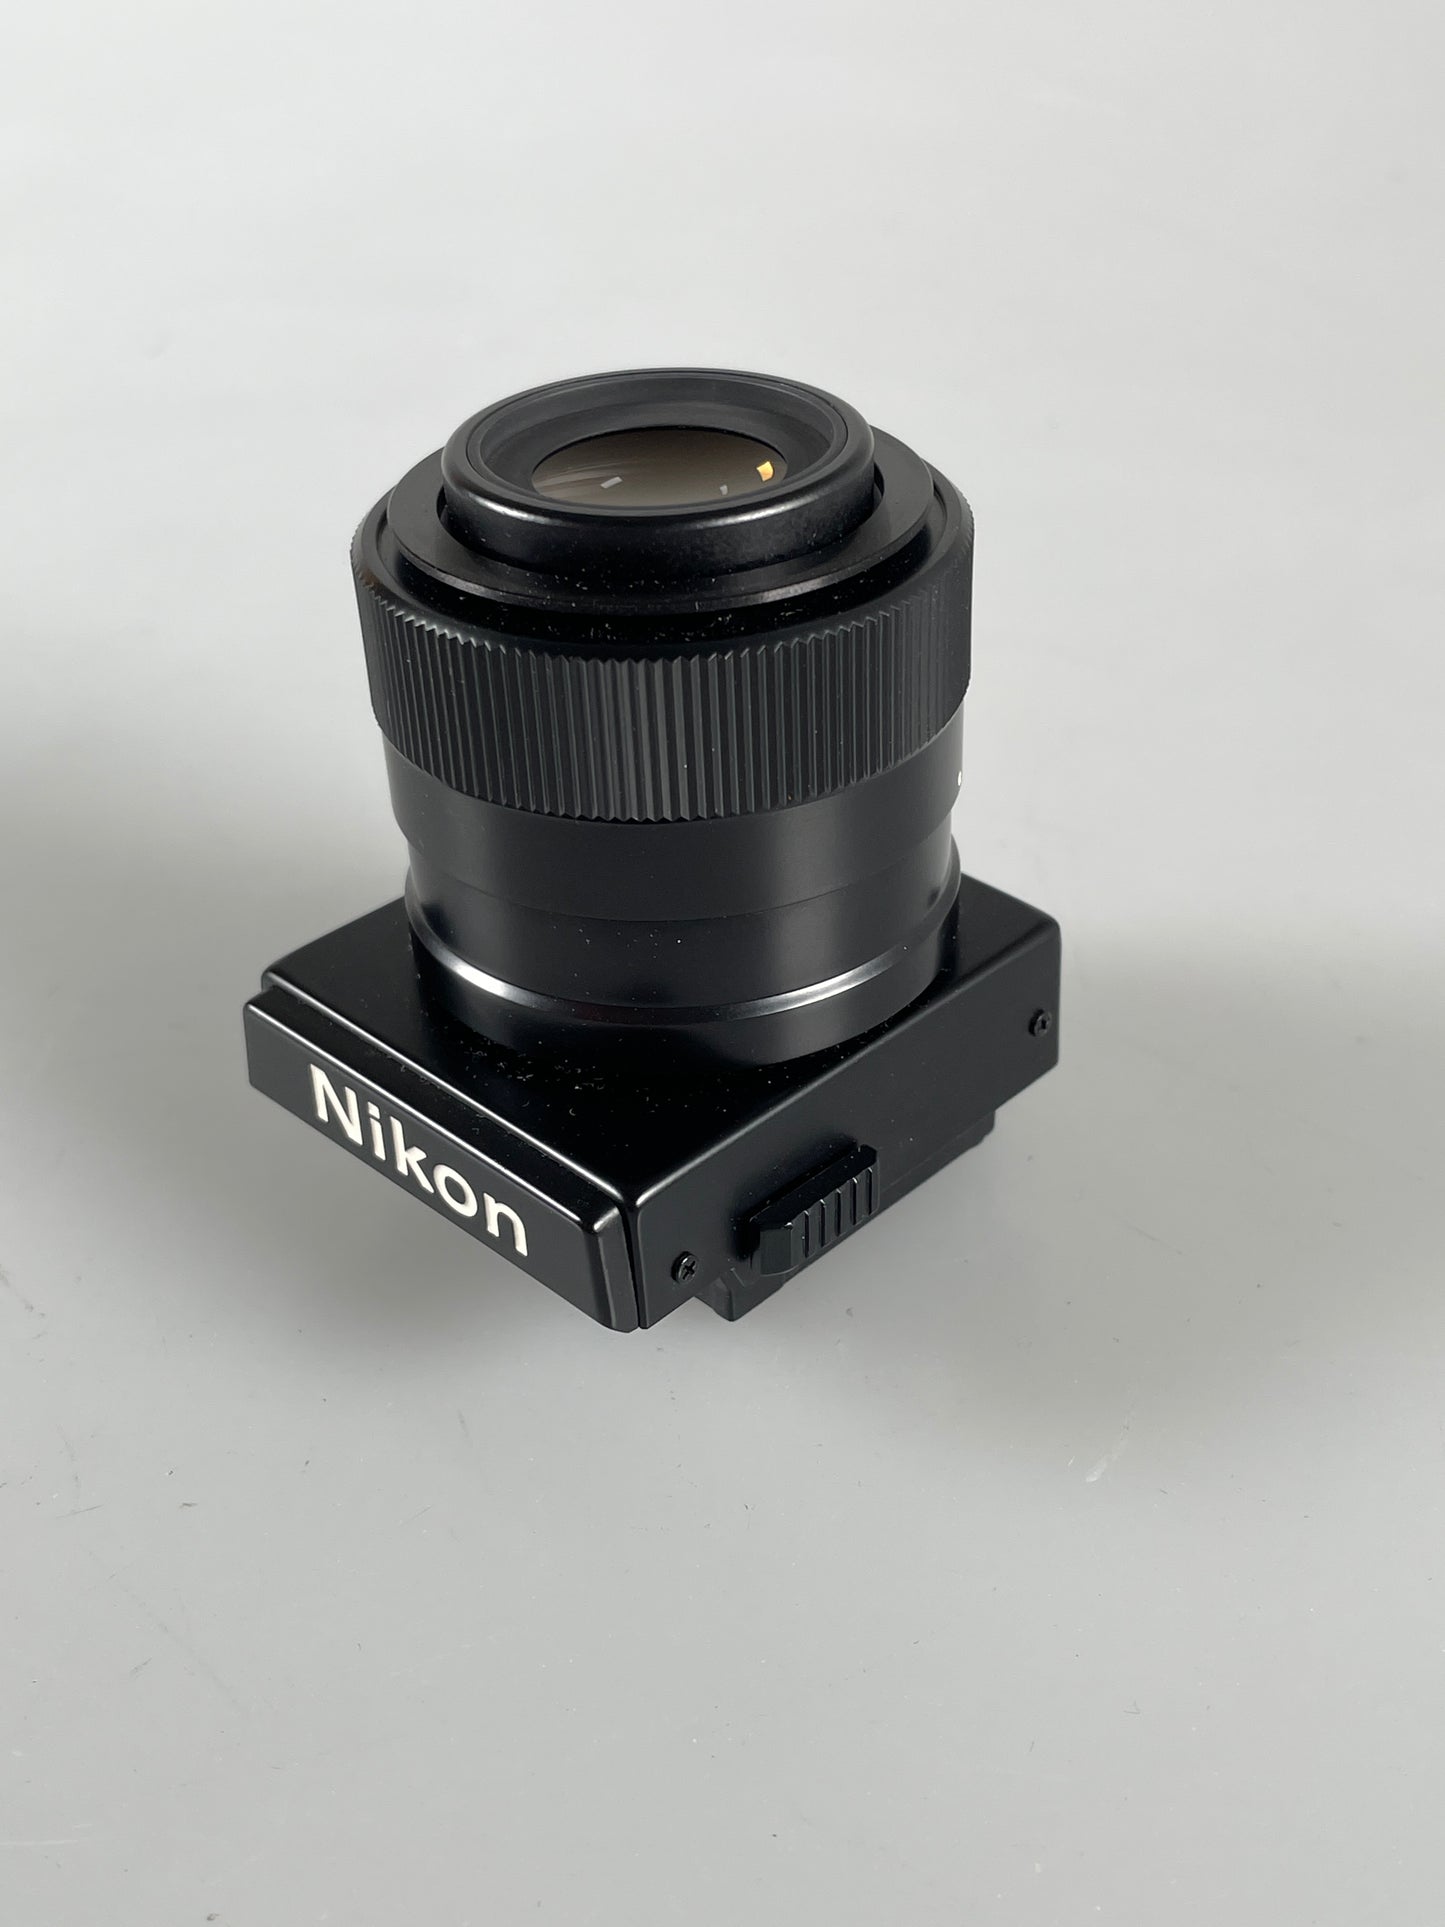 Nikon DW-4 6x High Magnification ViewFinder for F3